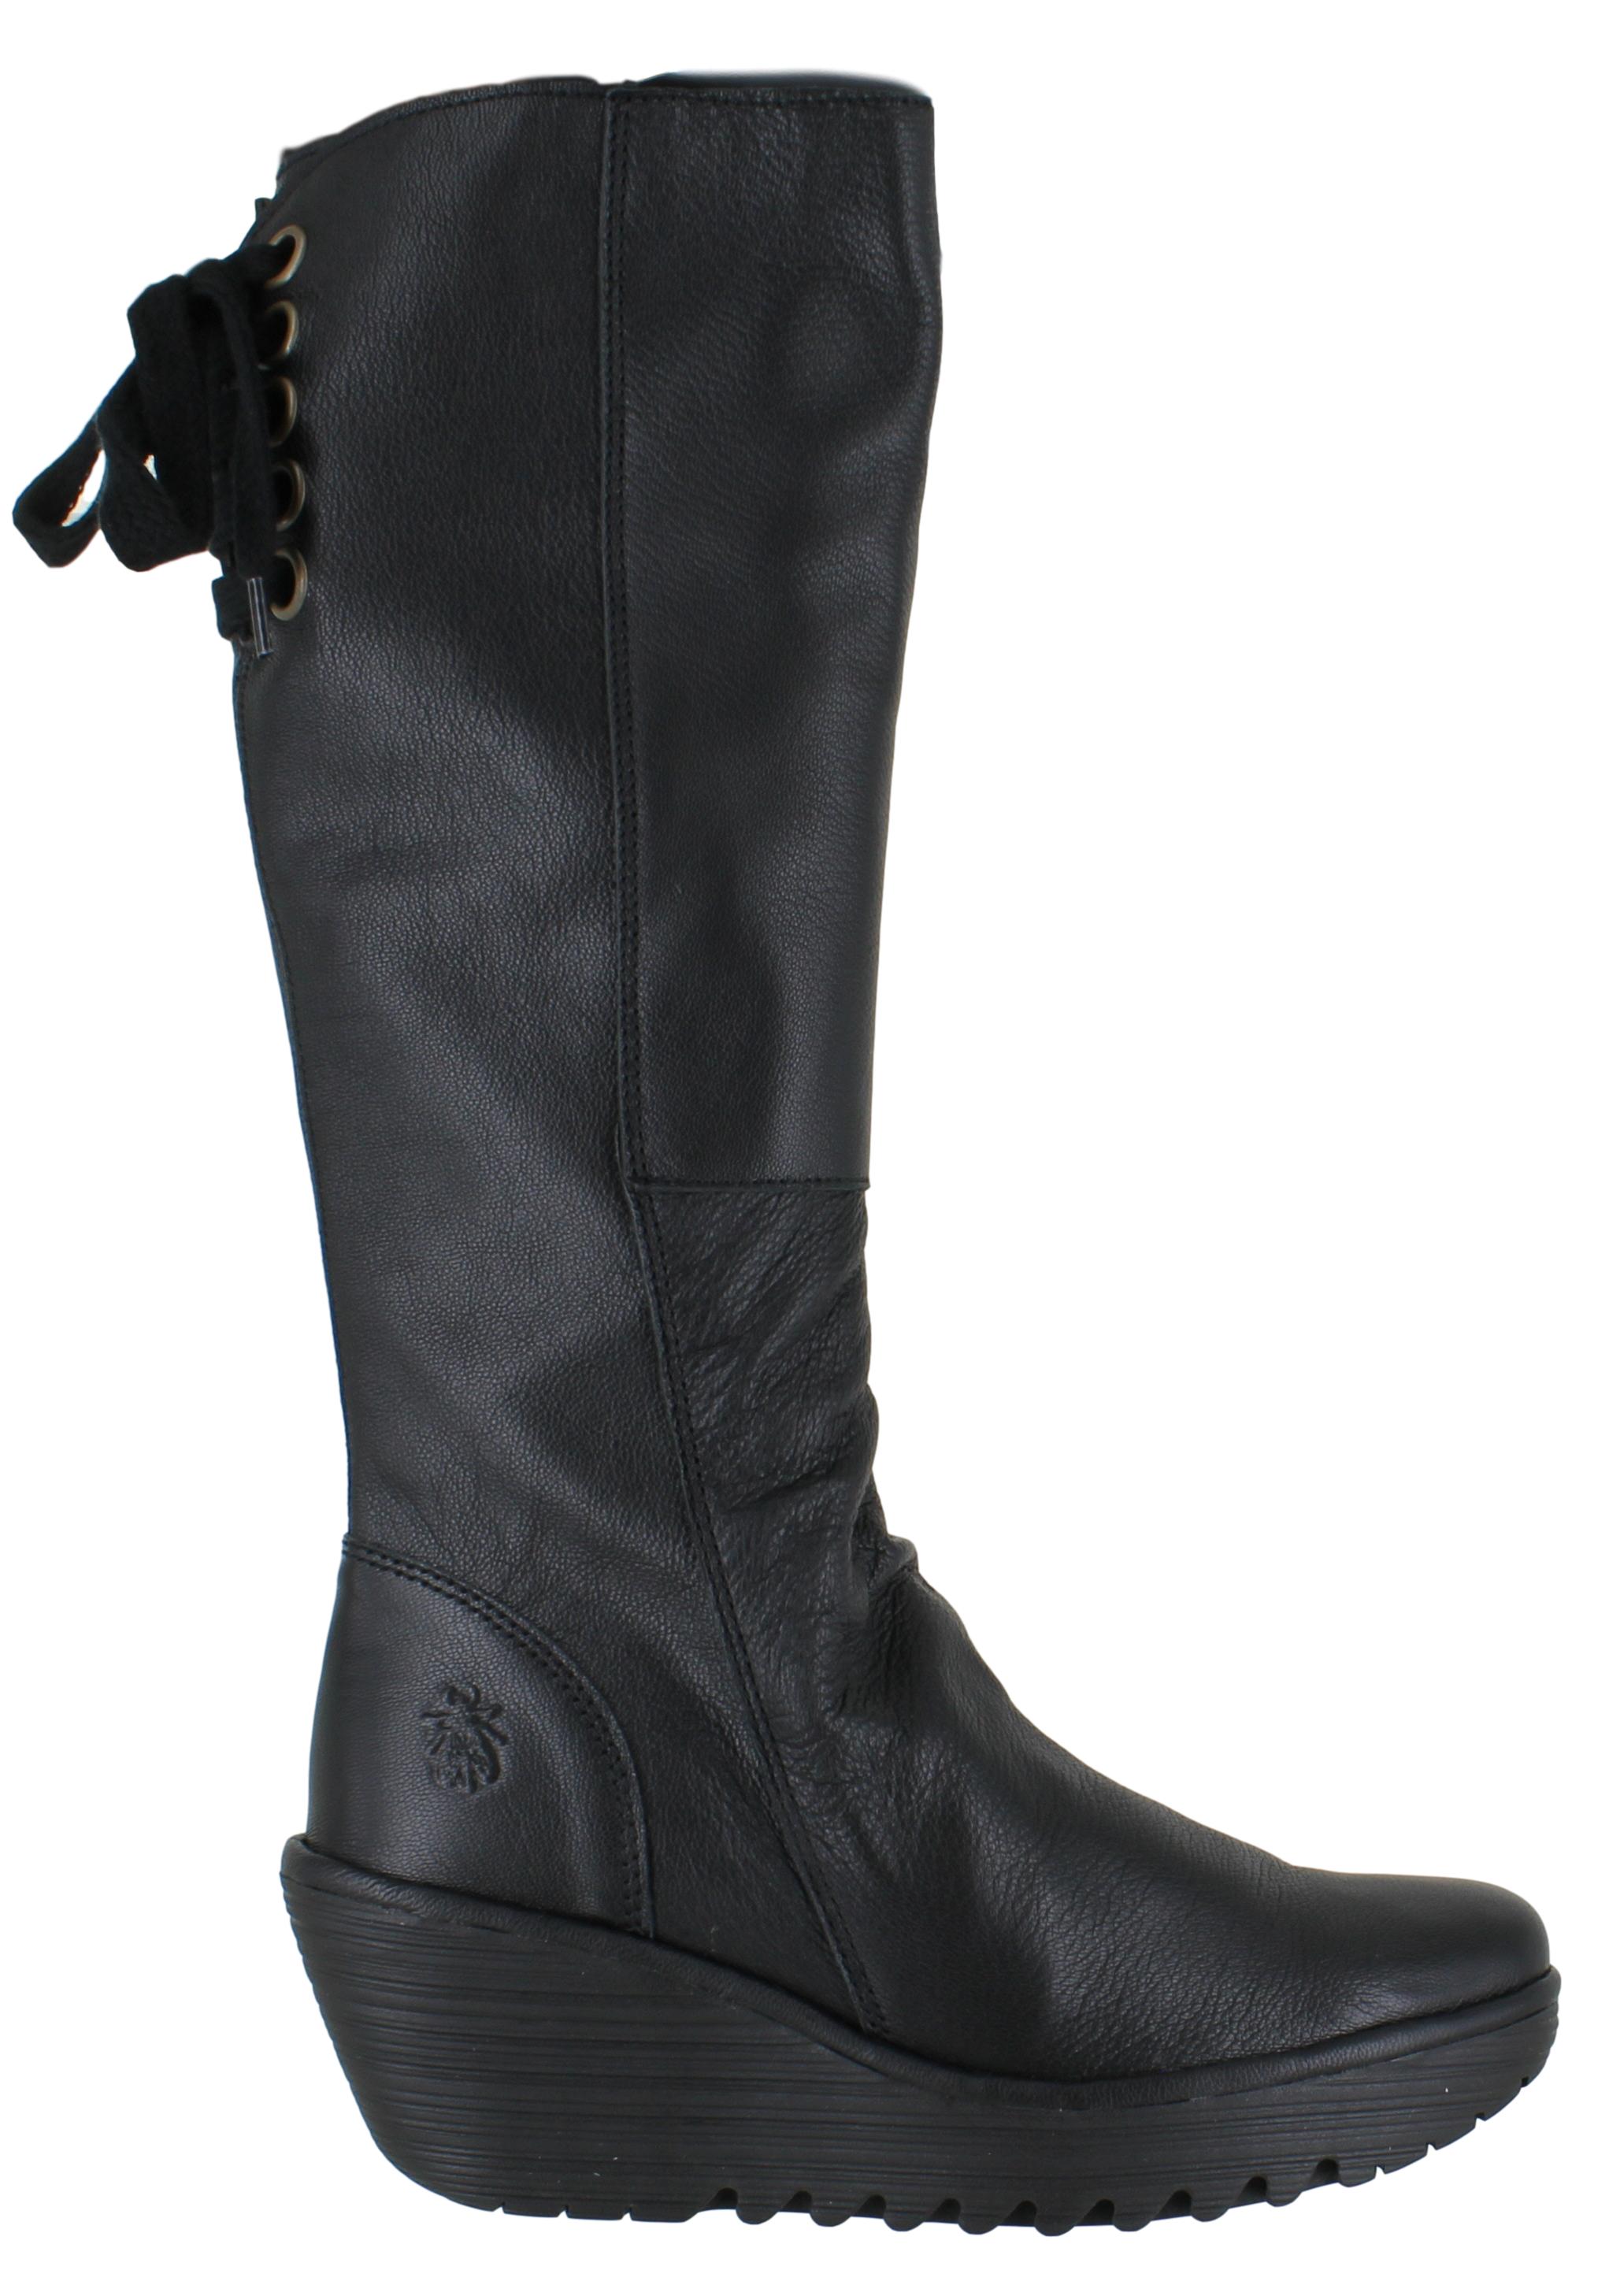 Womens Fly London Yust Wedged Heeled High Leather Zip Up Boots Sizes 4